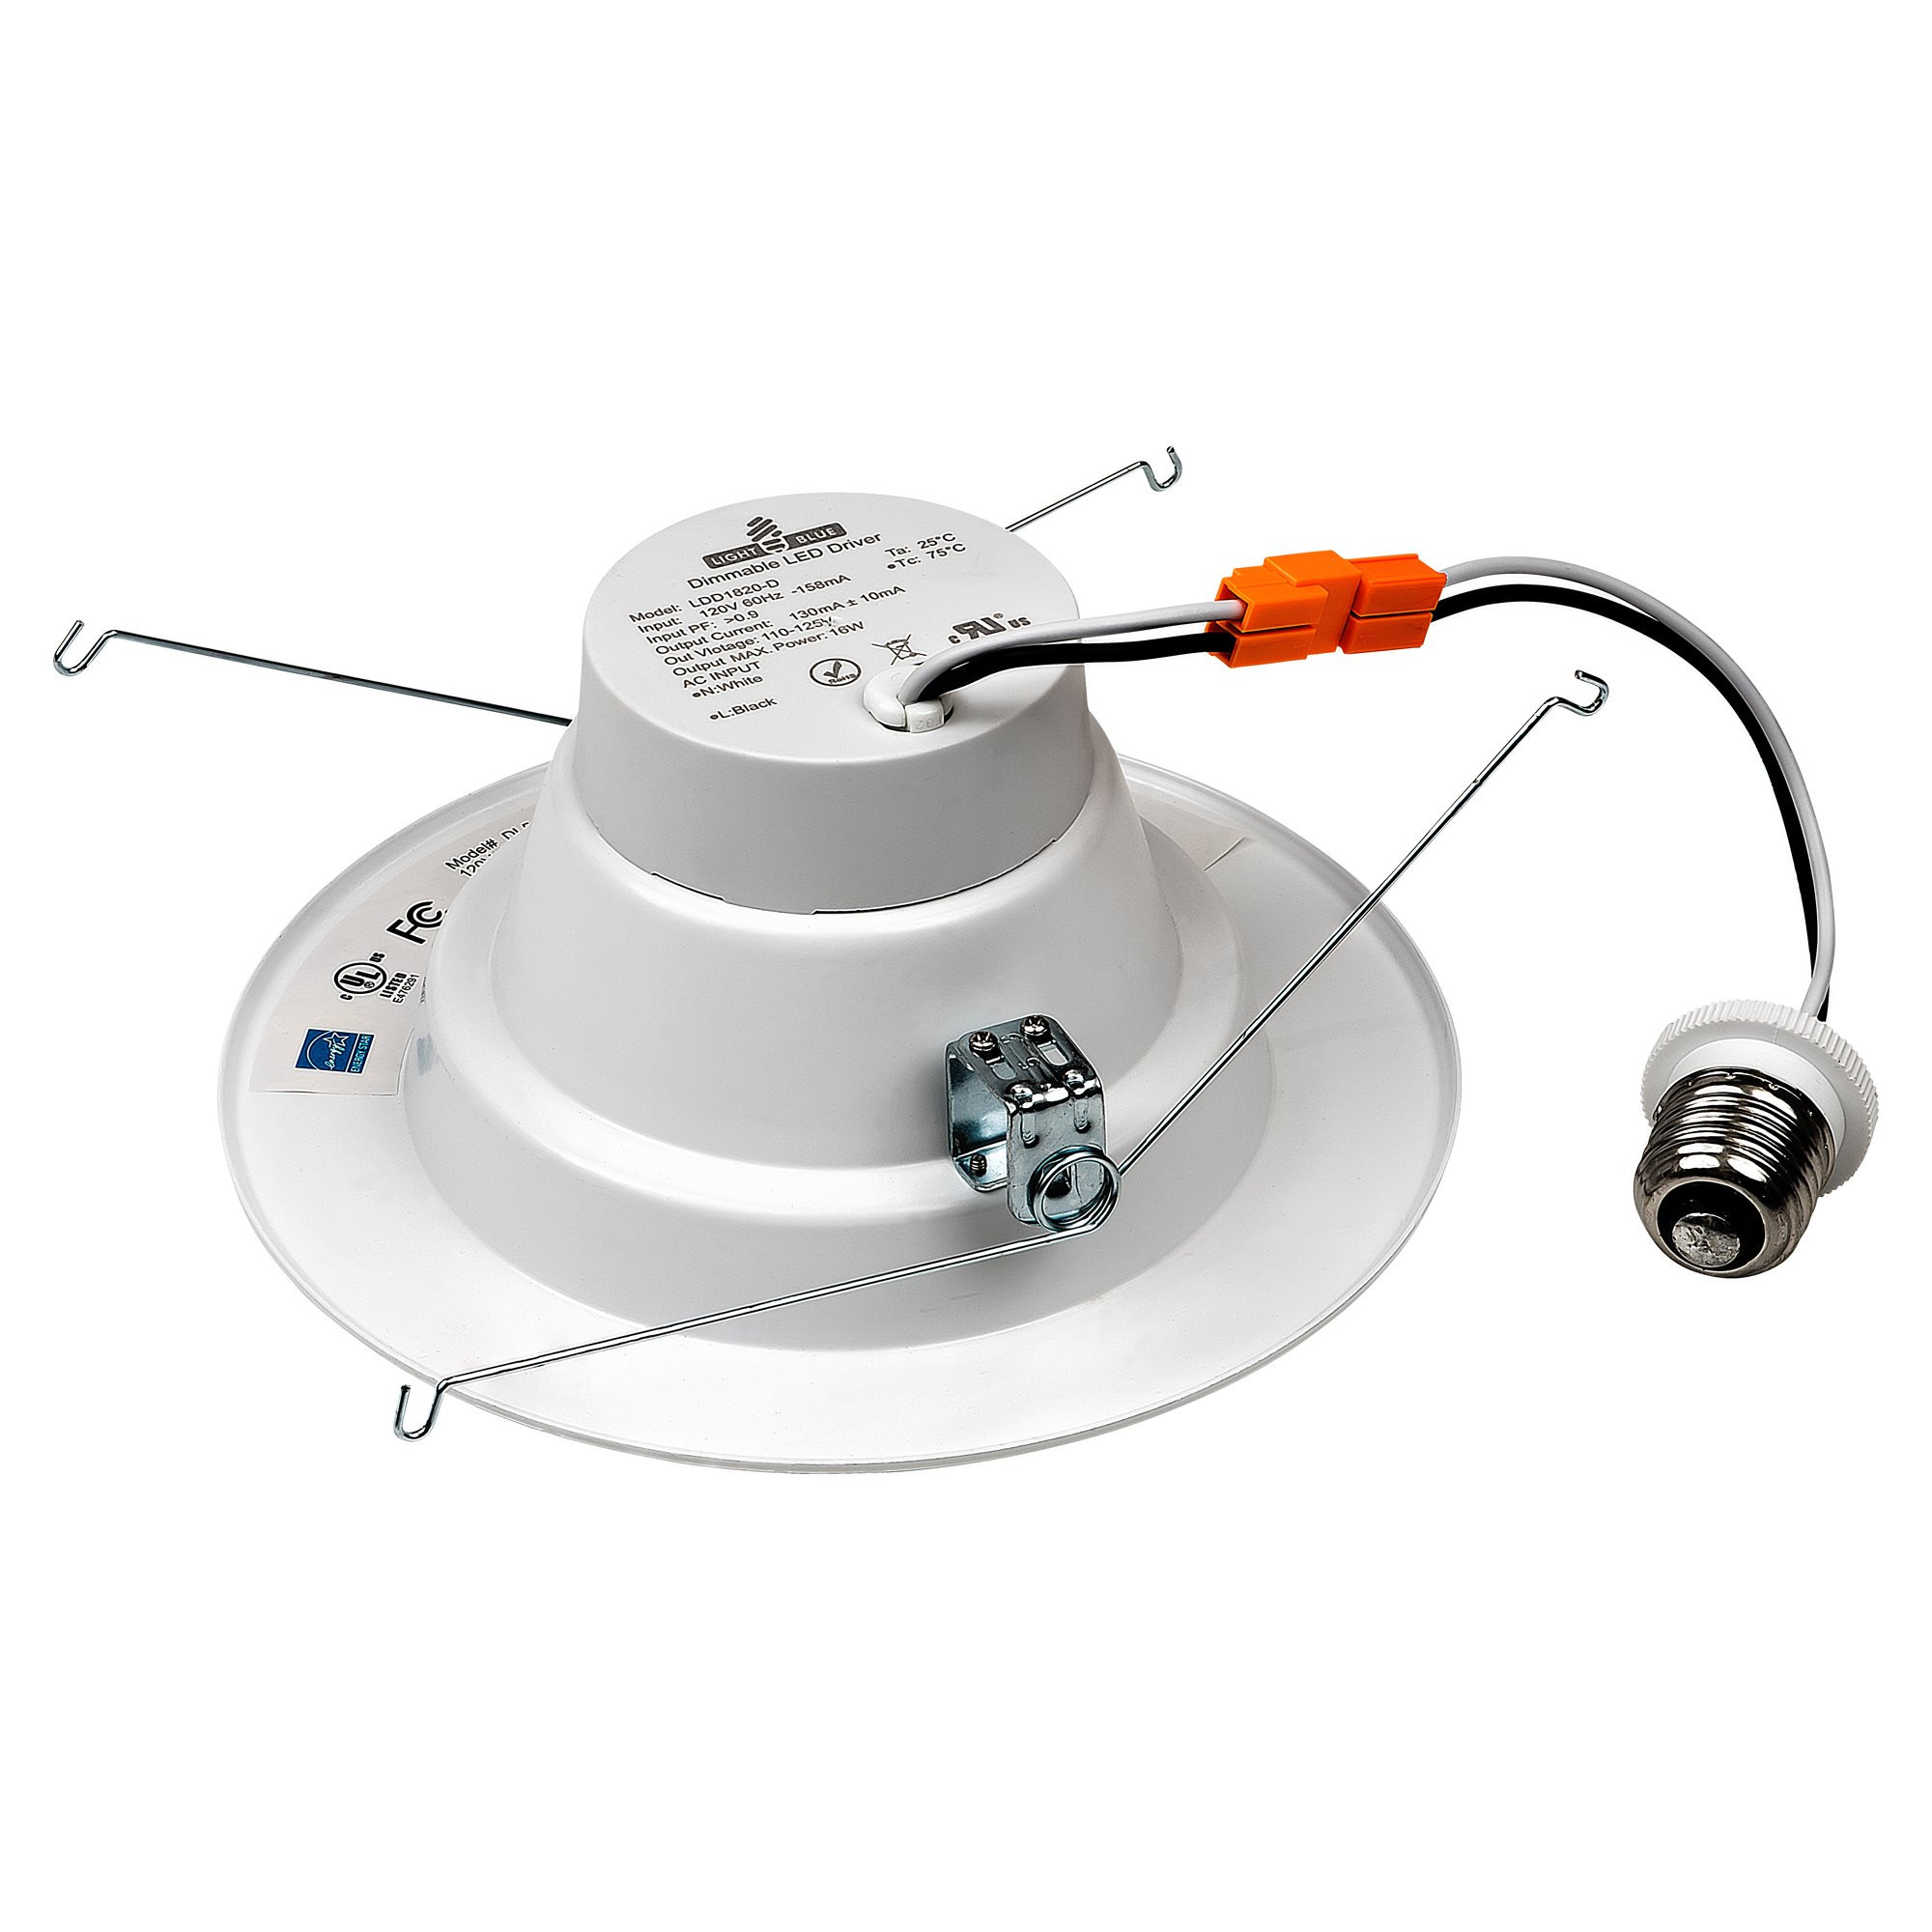 Best ideas about Retrofit Recessed Lighting
. Save or Pin LB 5 6 Inch LED Downlight Retrofit Recessed Lighting Now.